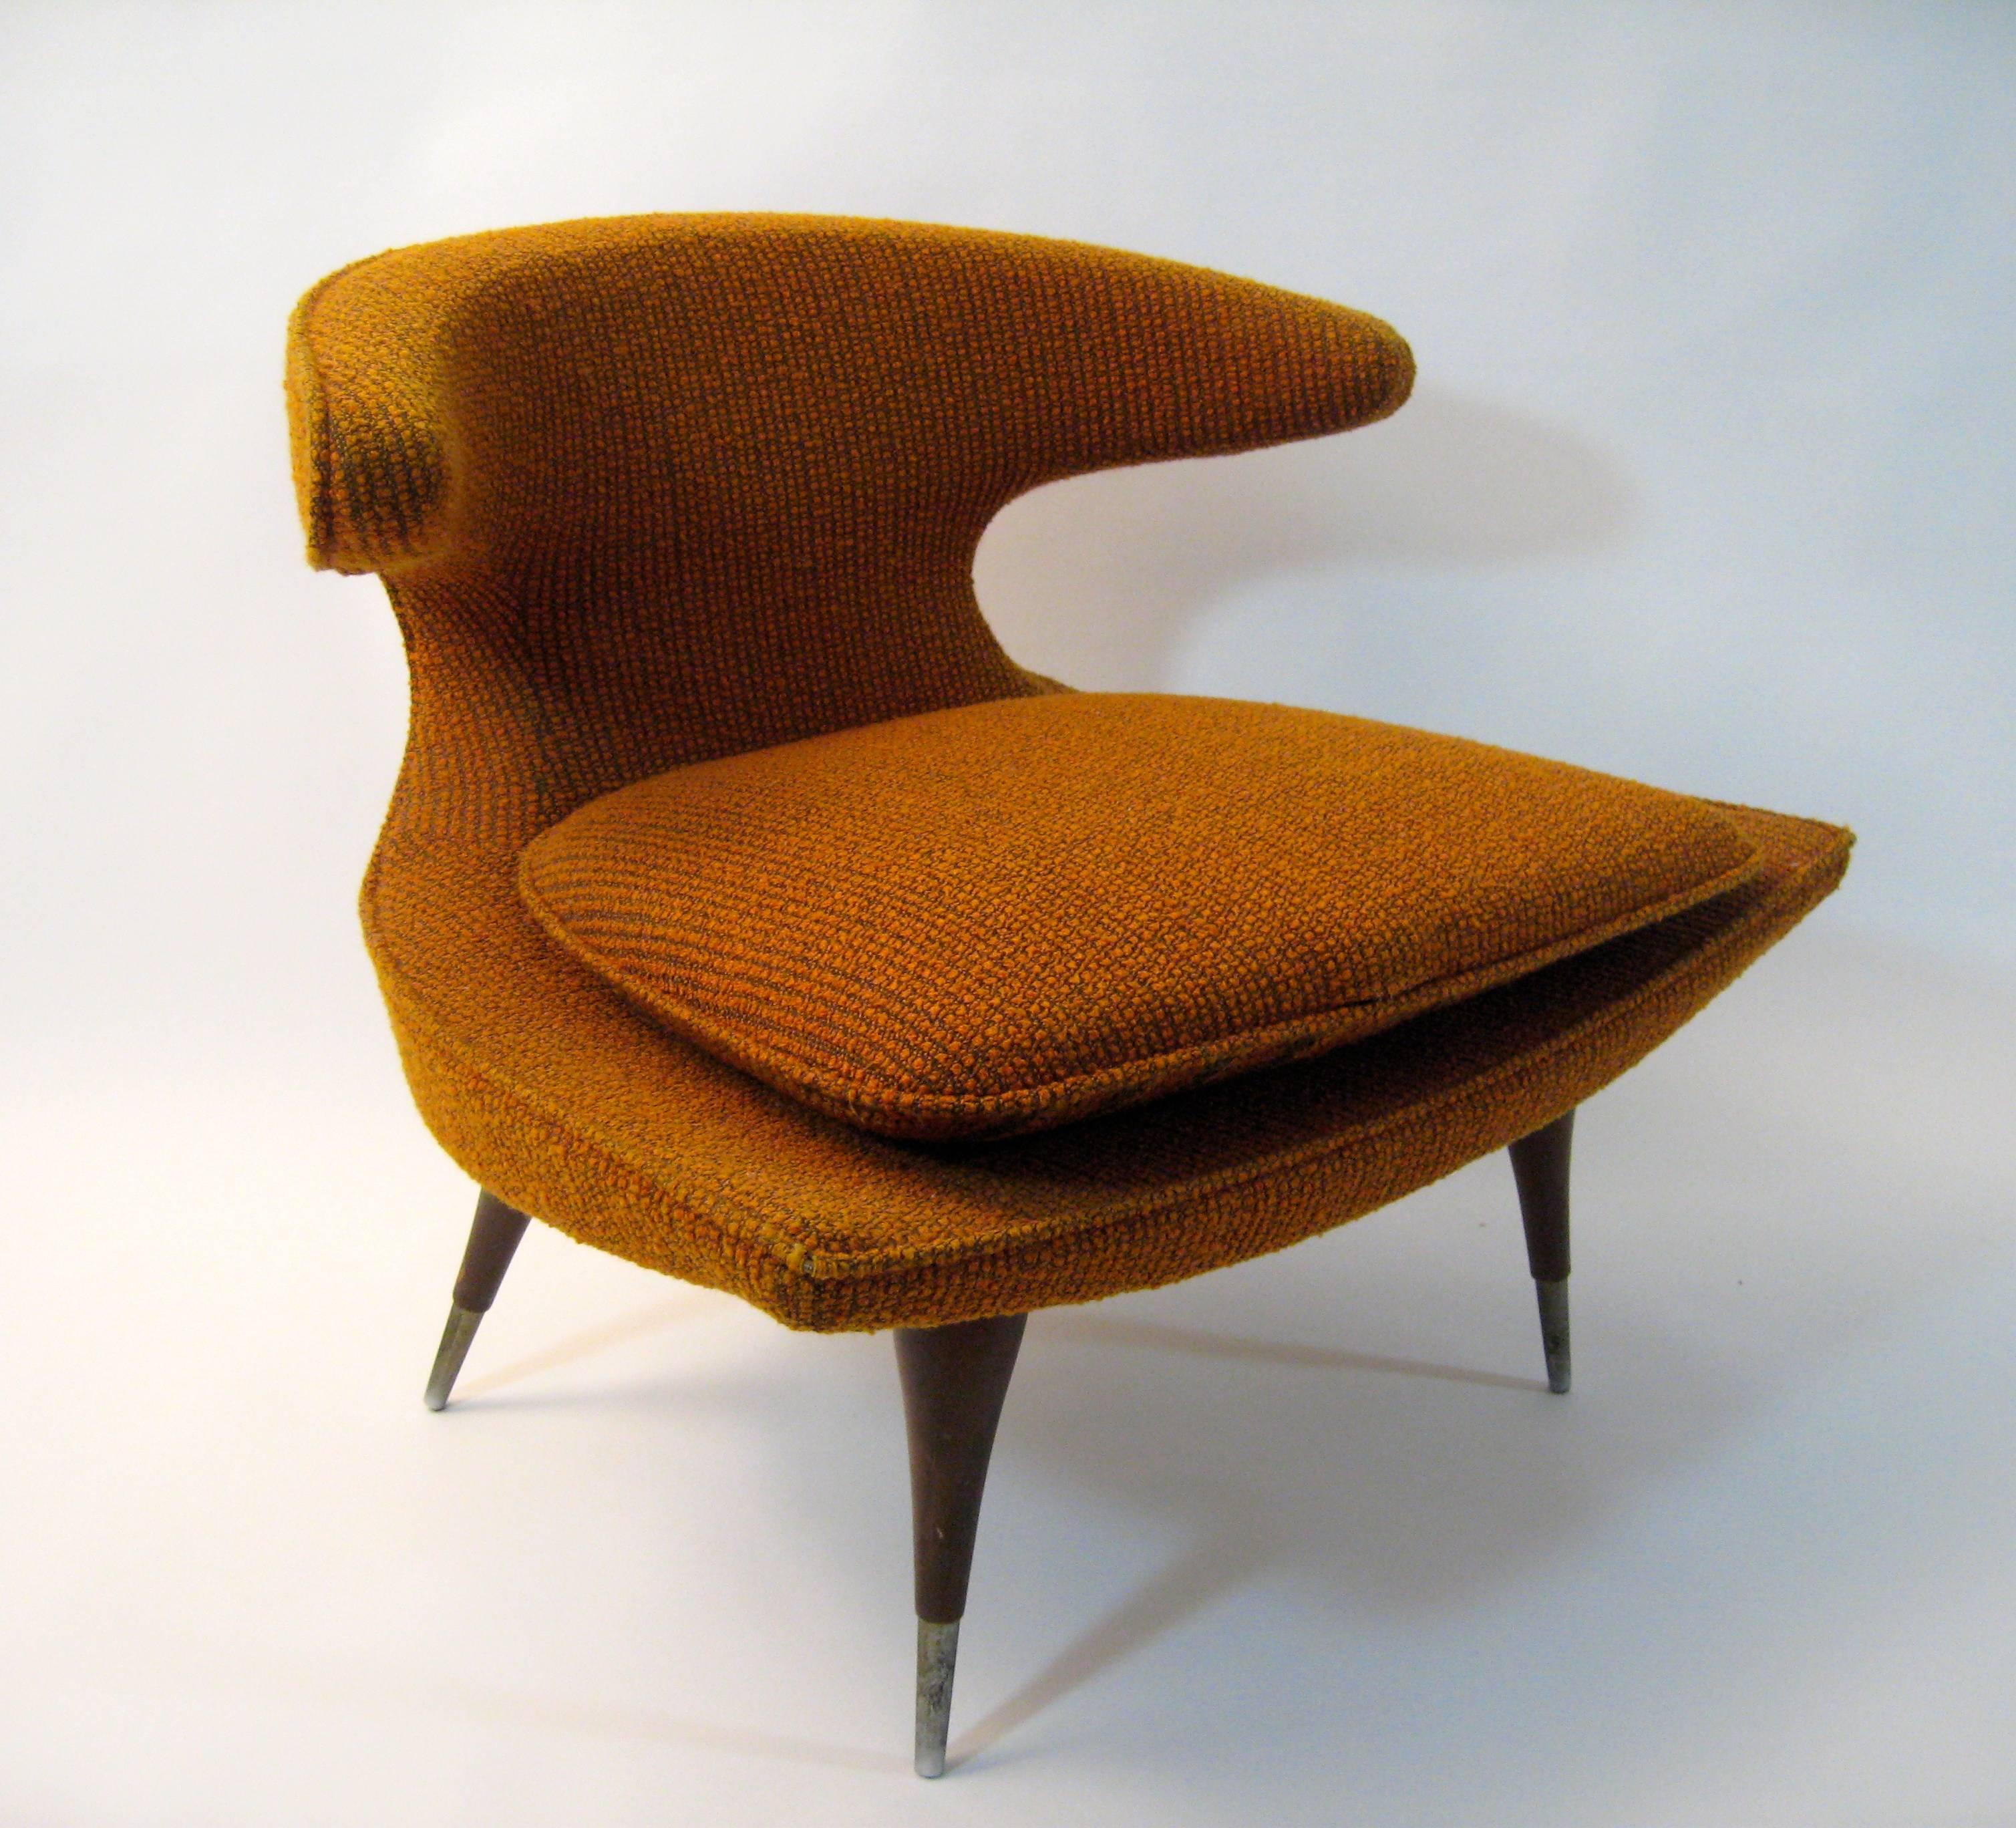 Exciting Atomic Era slipper chair made by Karpen of California.  The Horn Chair still retains its amazing burnt orange nubby fabric.  The seat cushion can be turned over displaying a different design. Bulbous tapering legs ending in aluminum sabots.